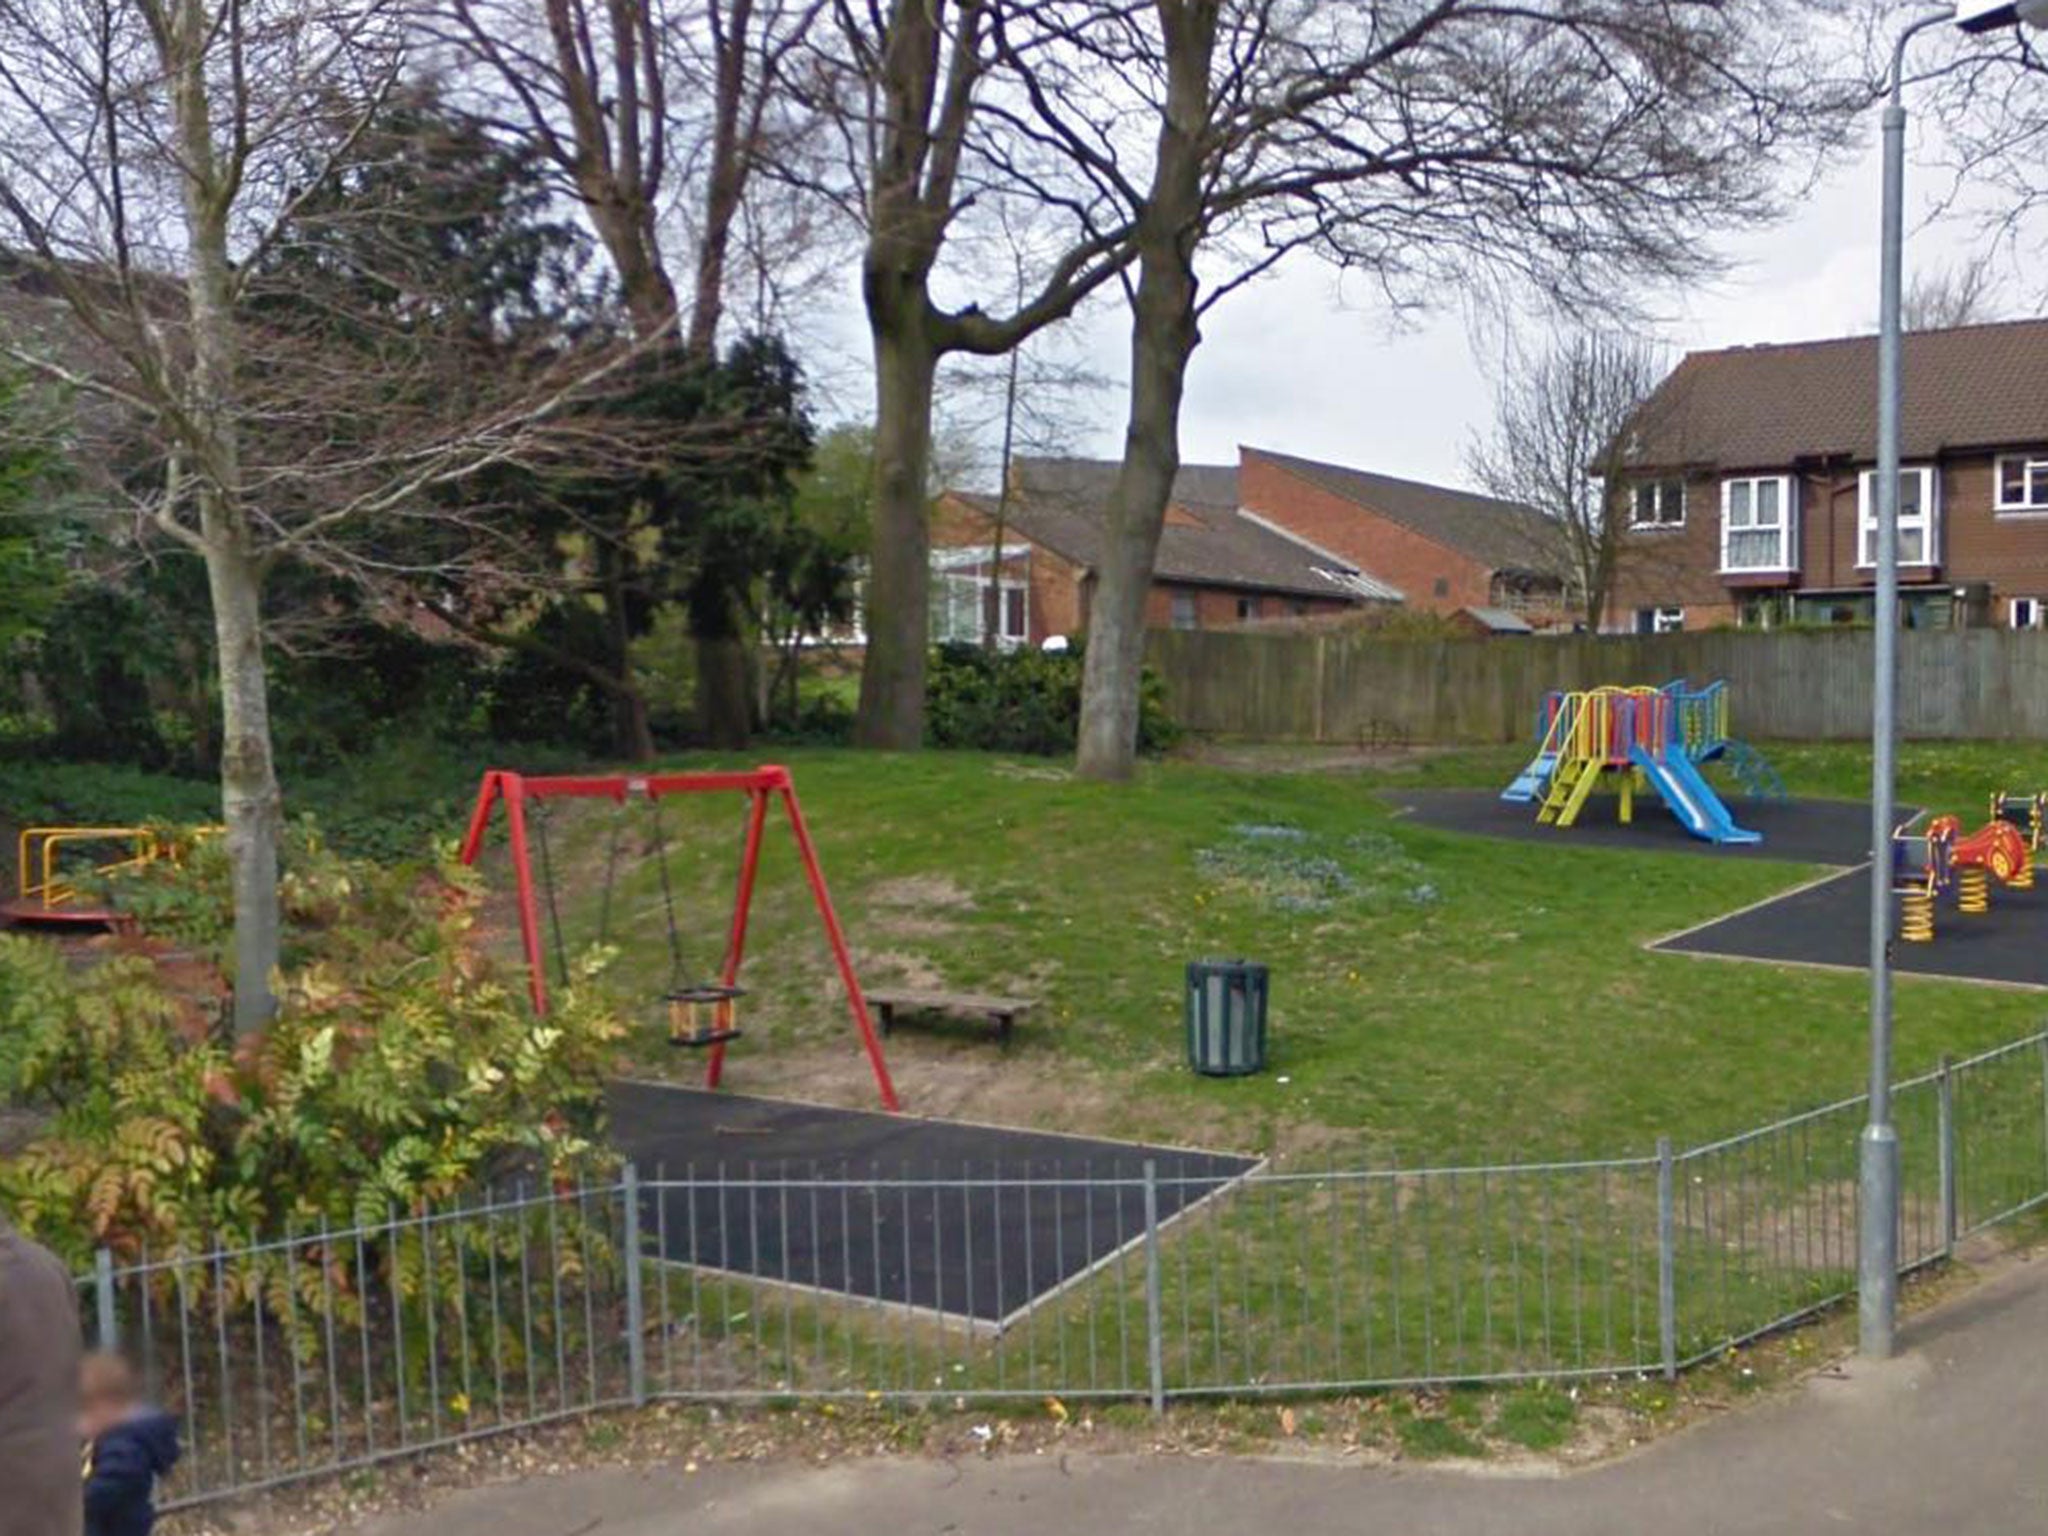 A children's play area in Montgomery Gardens, near Sergei Skripal's home in Salisbury, has been cordoned off by police